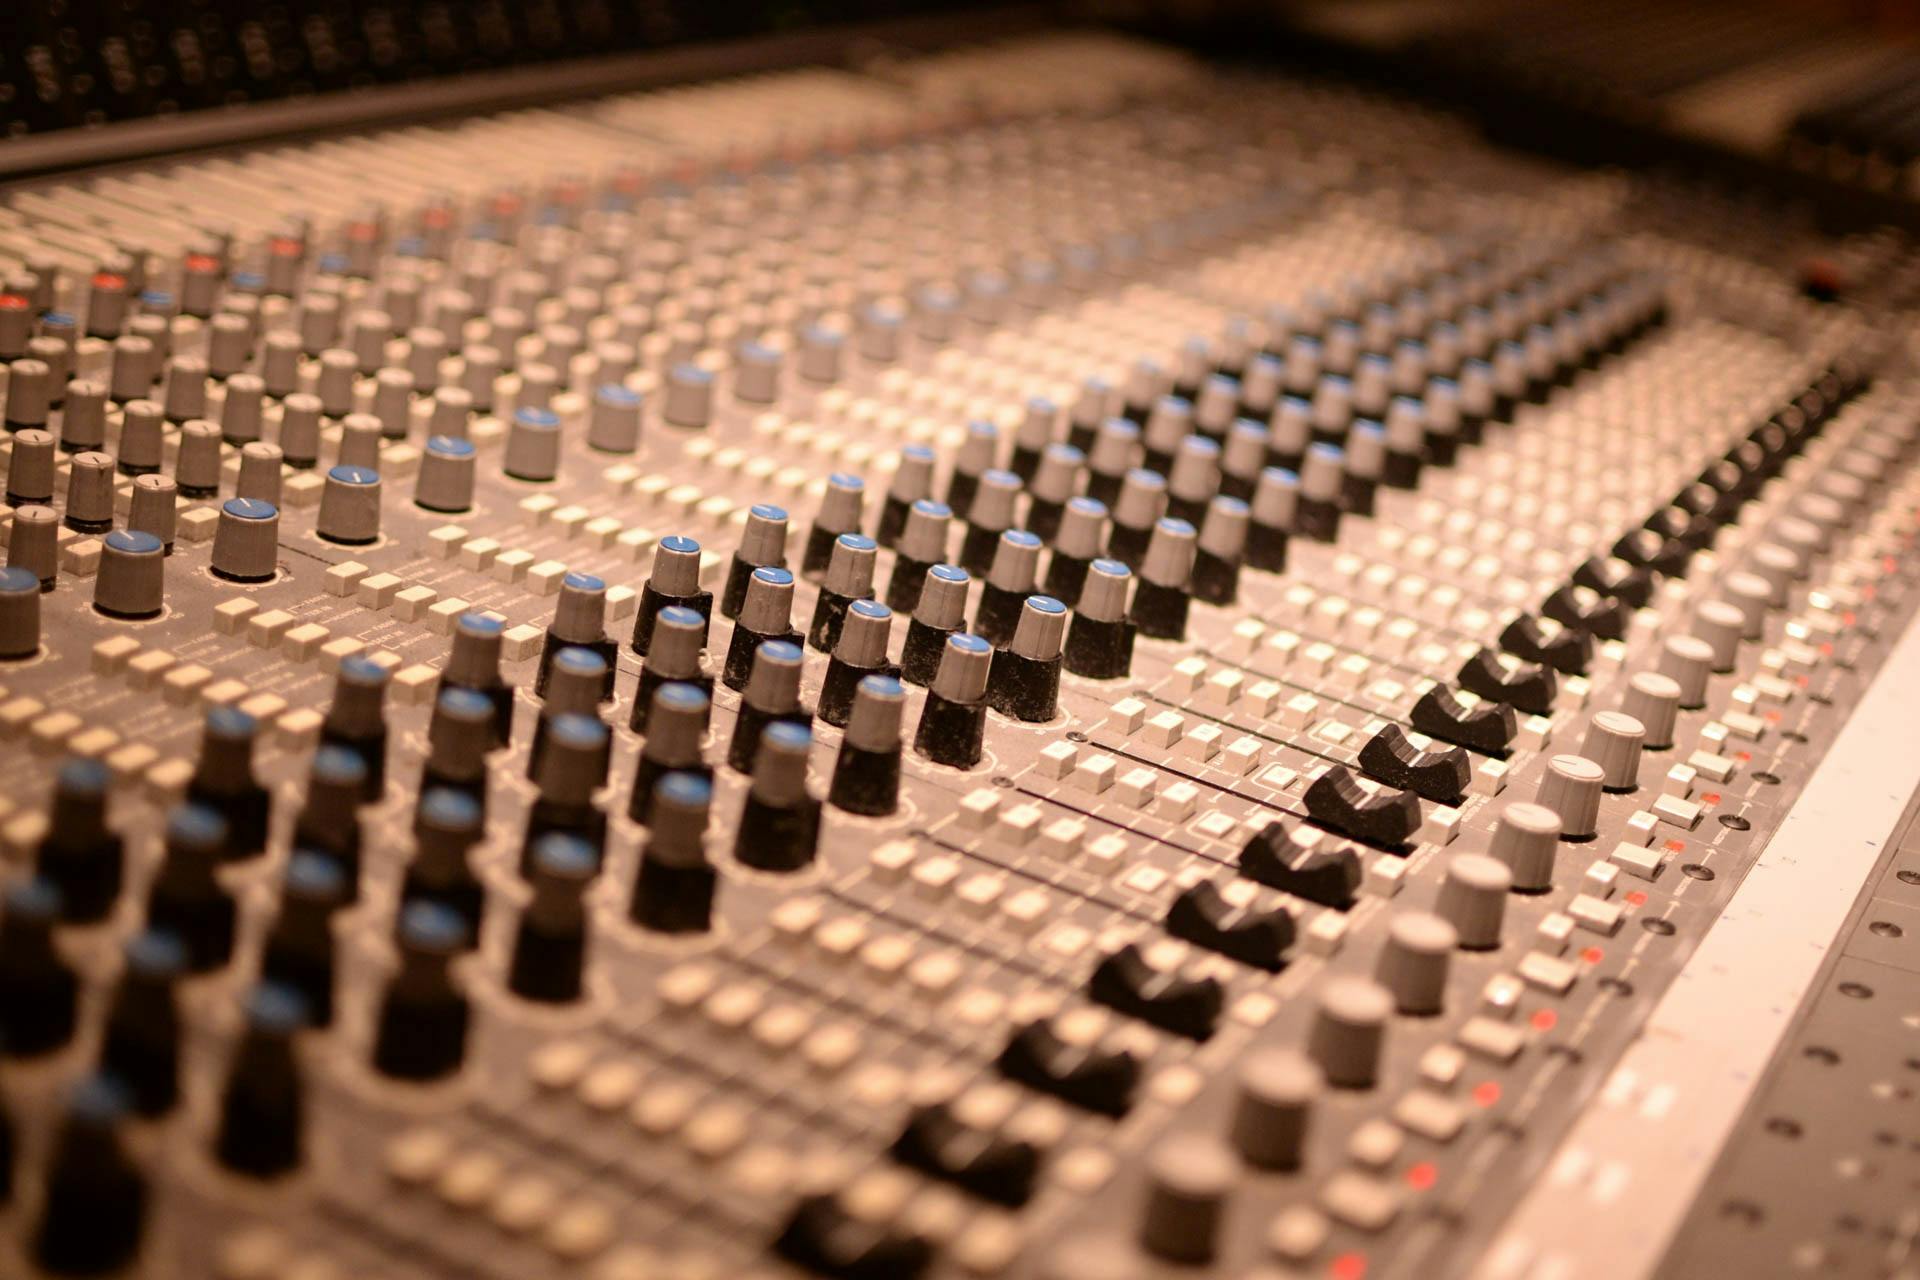 Mixing table